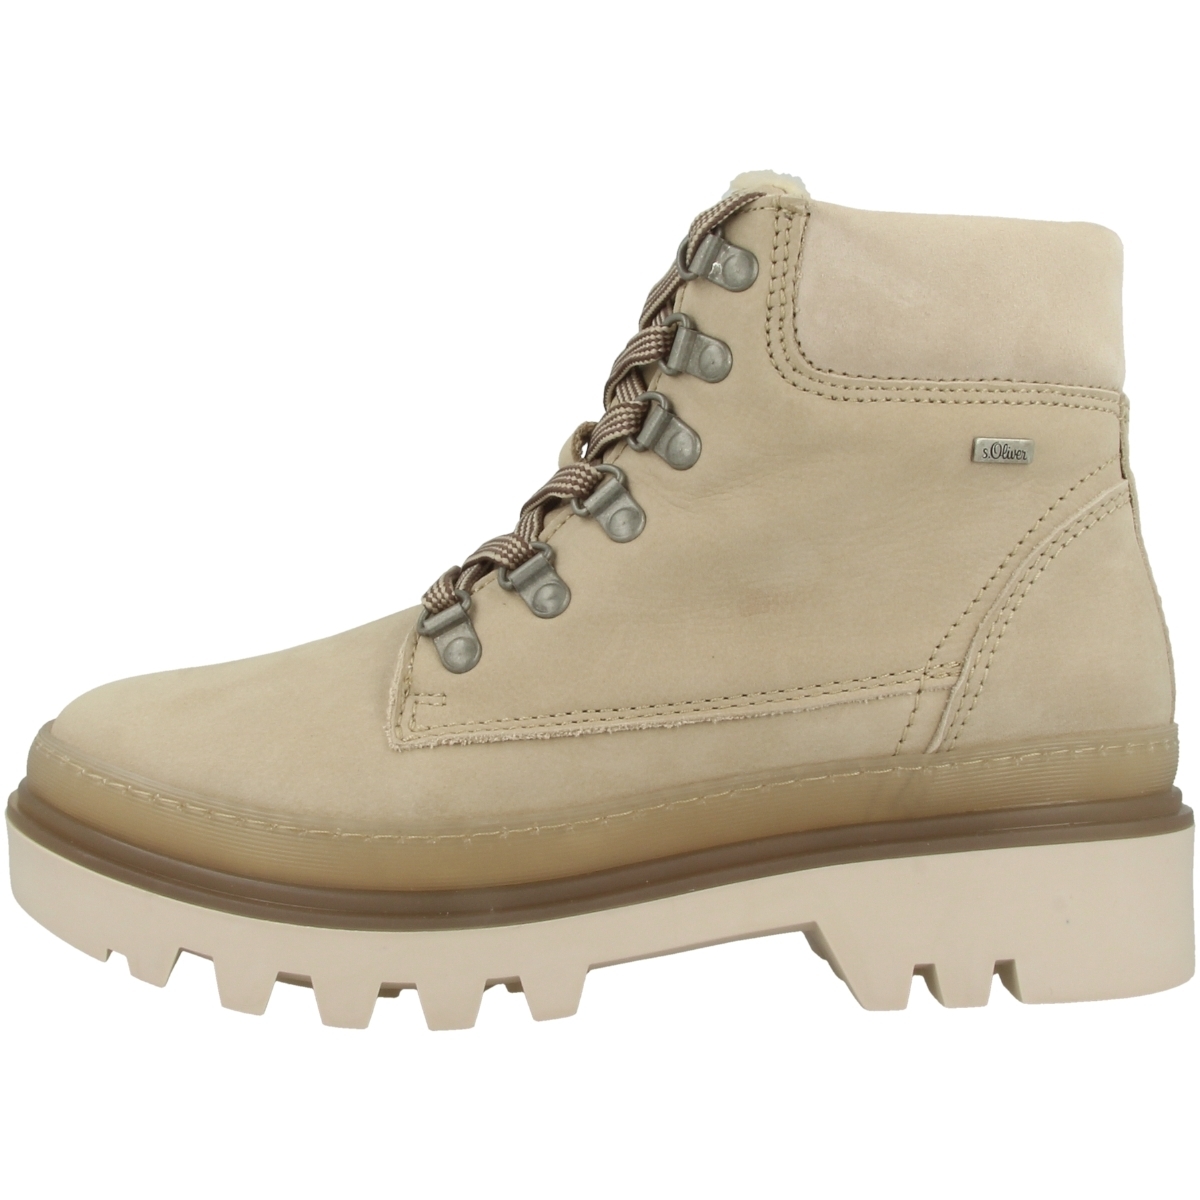 s.Oliver 5-26287-37 Boots beige